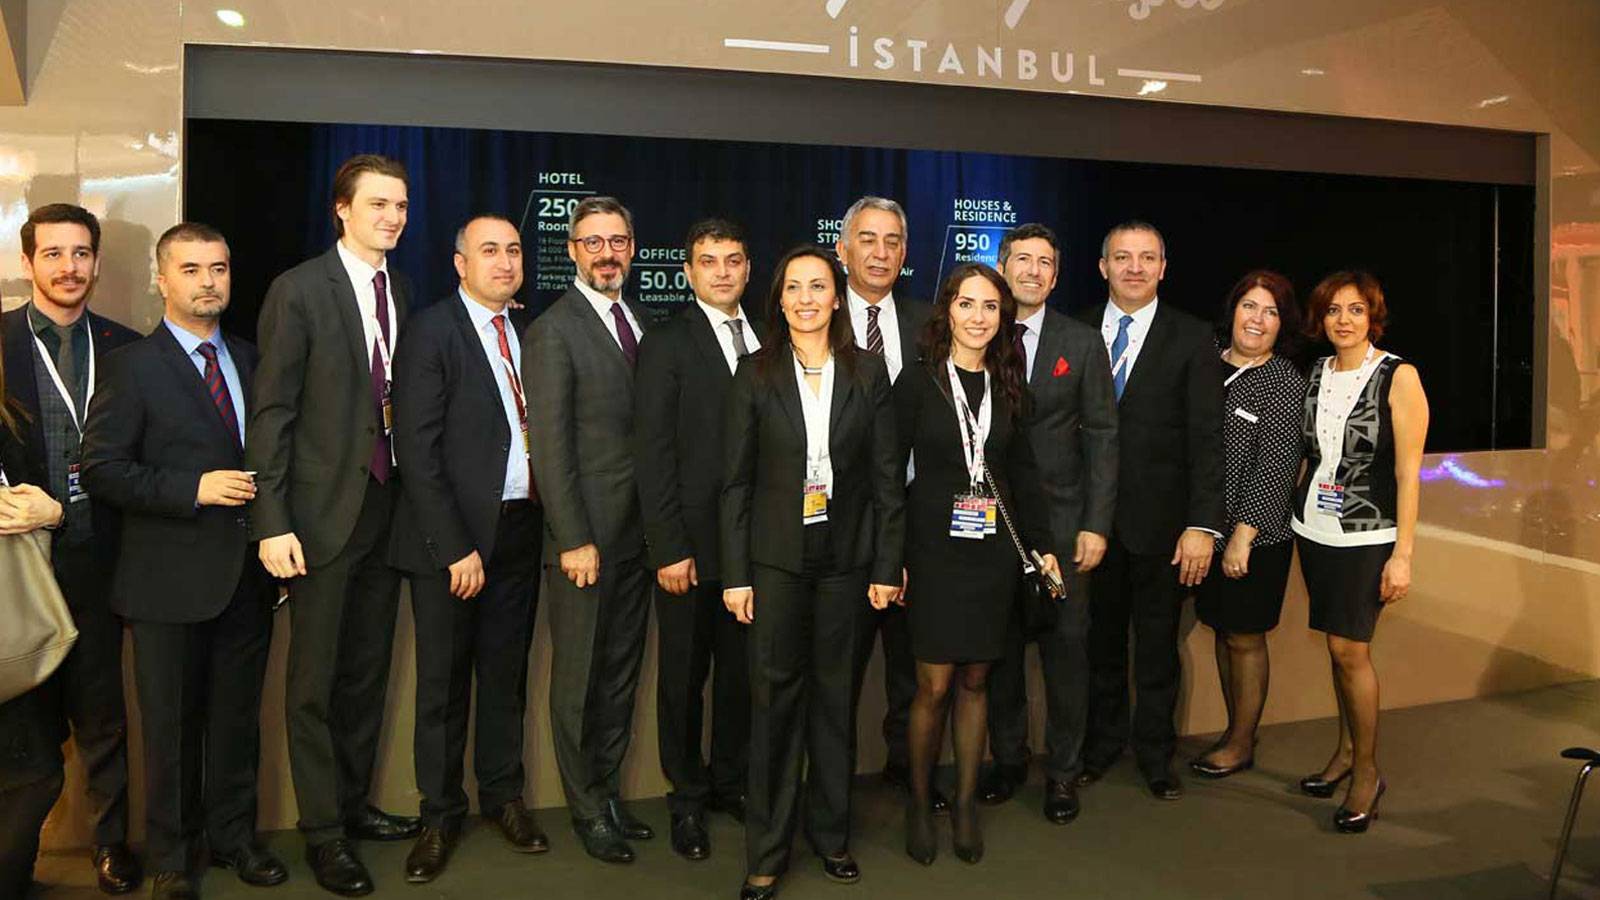 Official Launch of Piyalepasa Istanbul Project had been realized at Mipim in Cannes